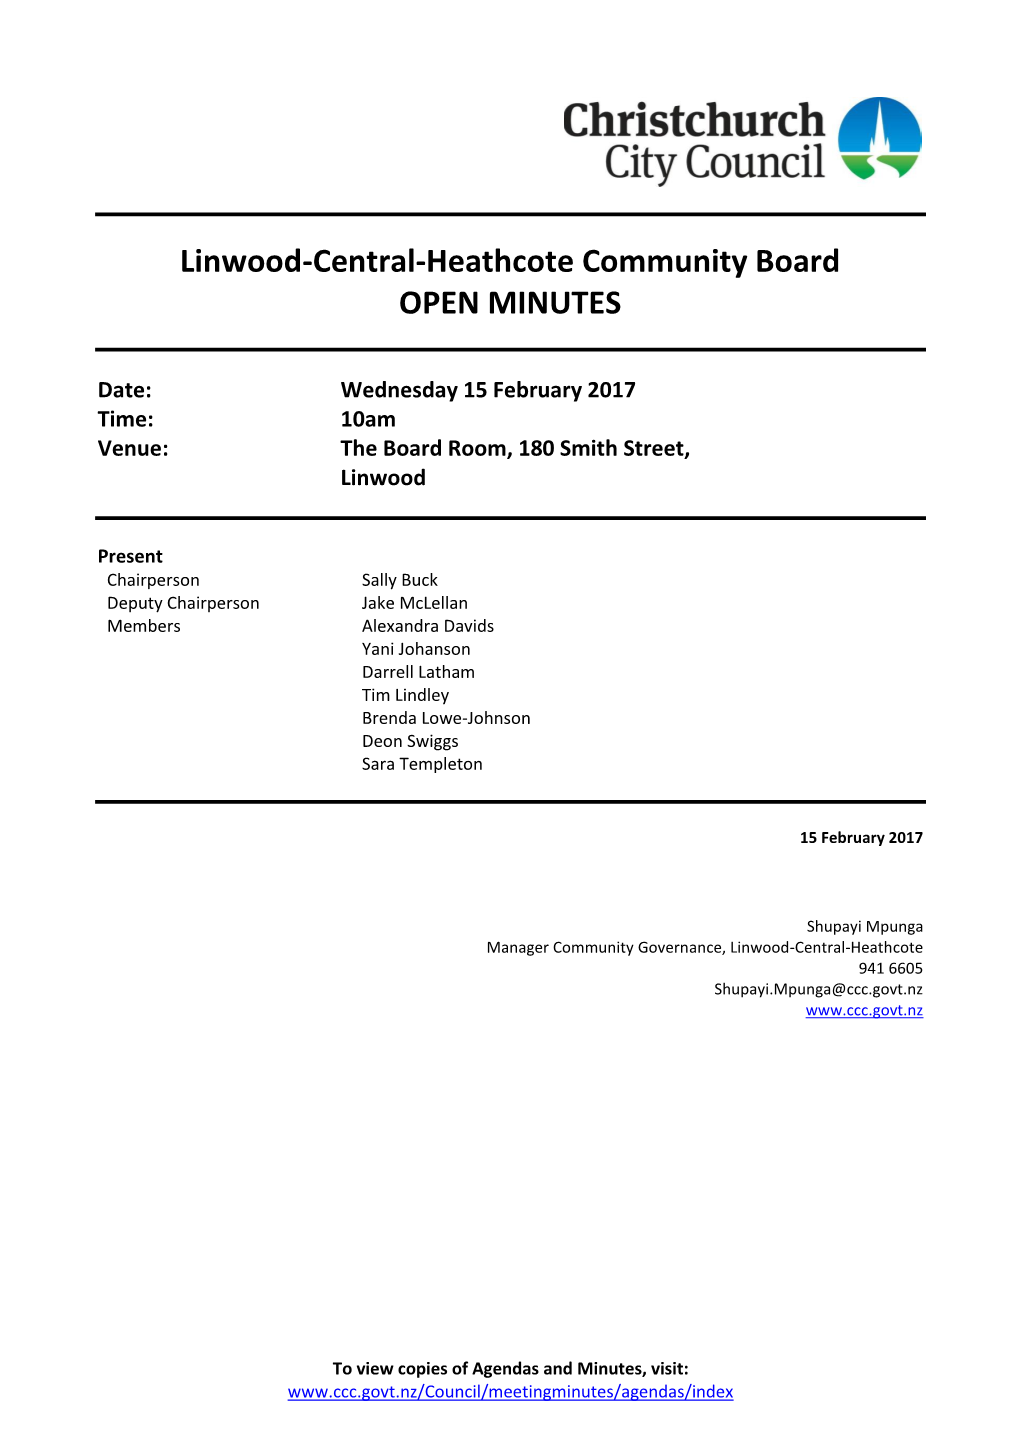 Minutes of Linwood-Central-Heathcote